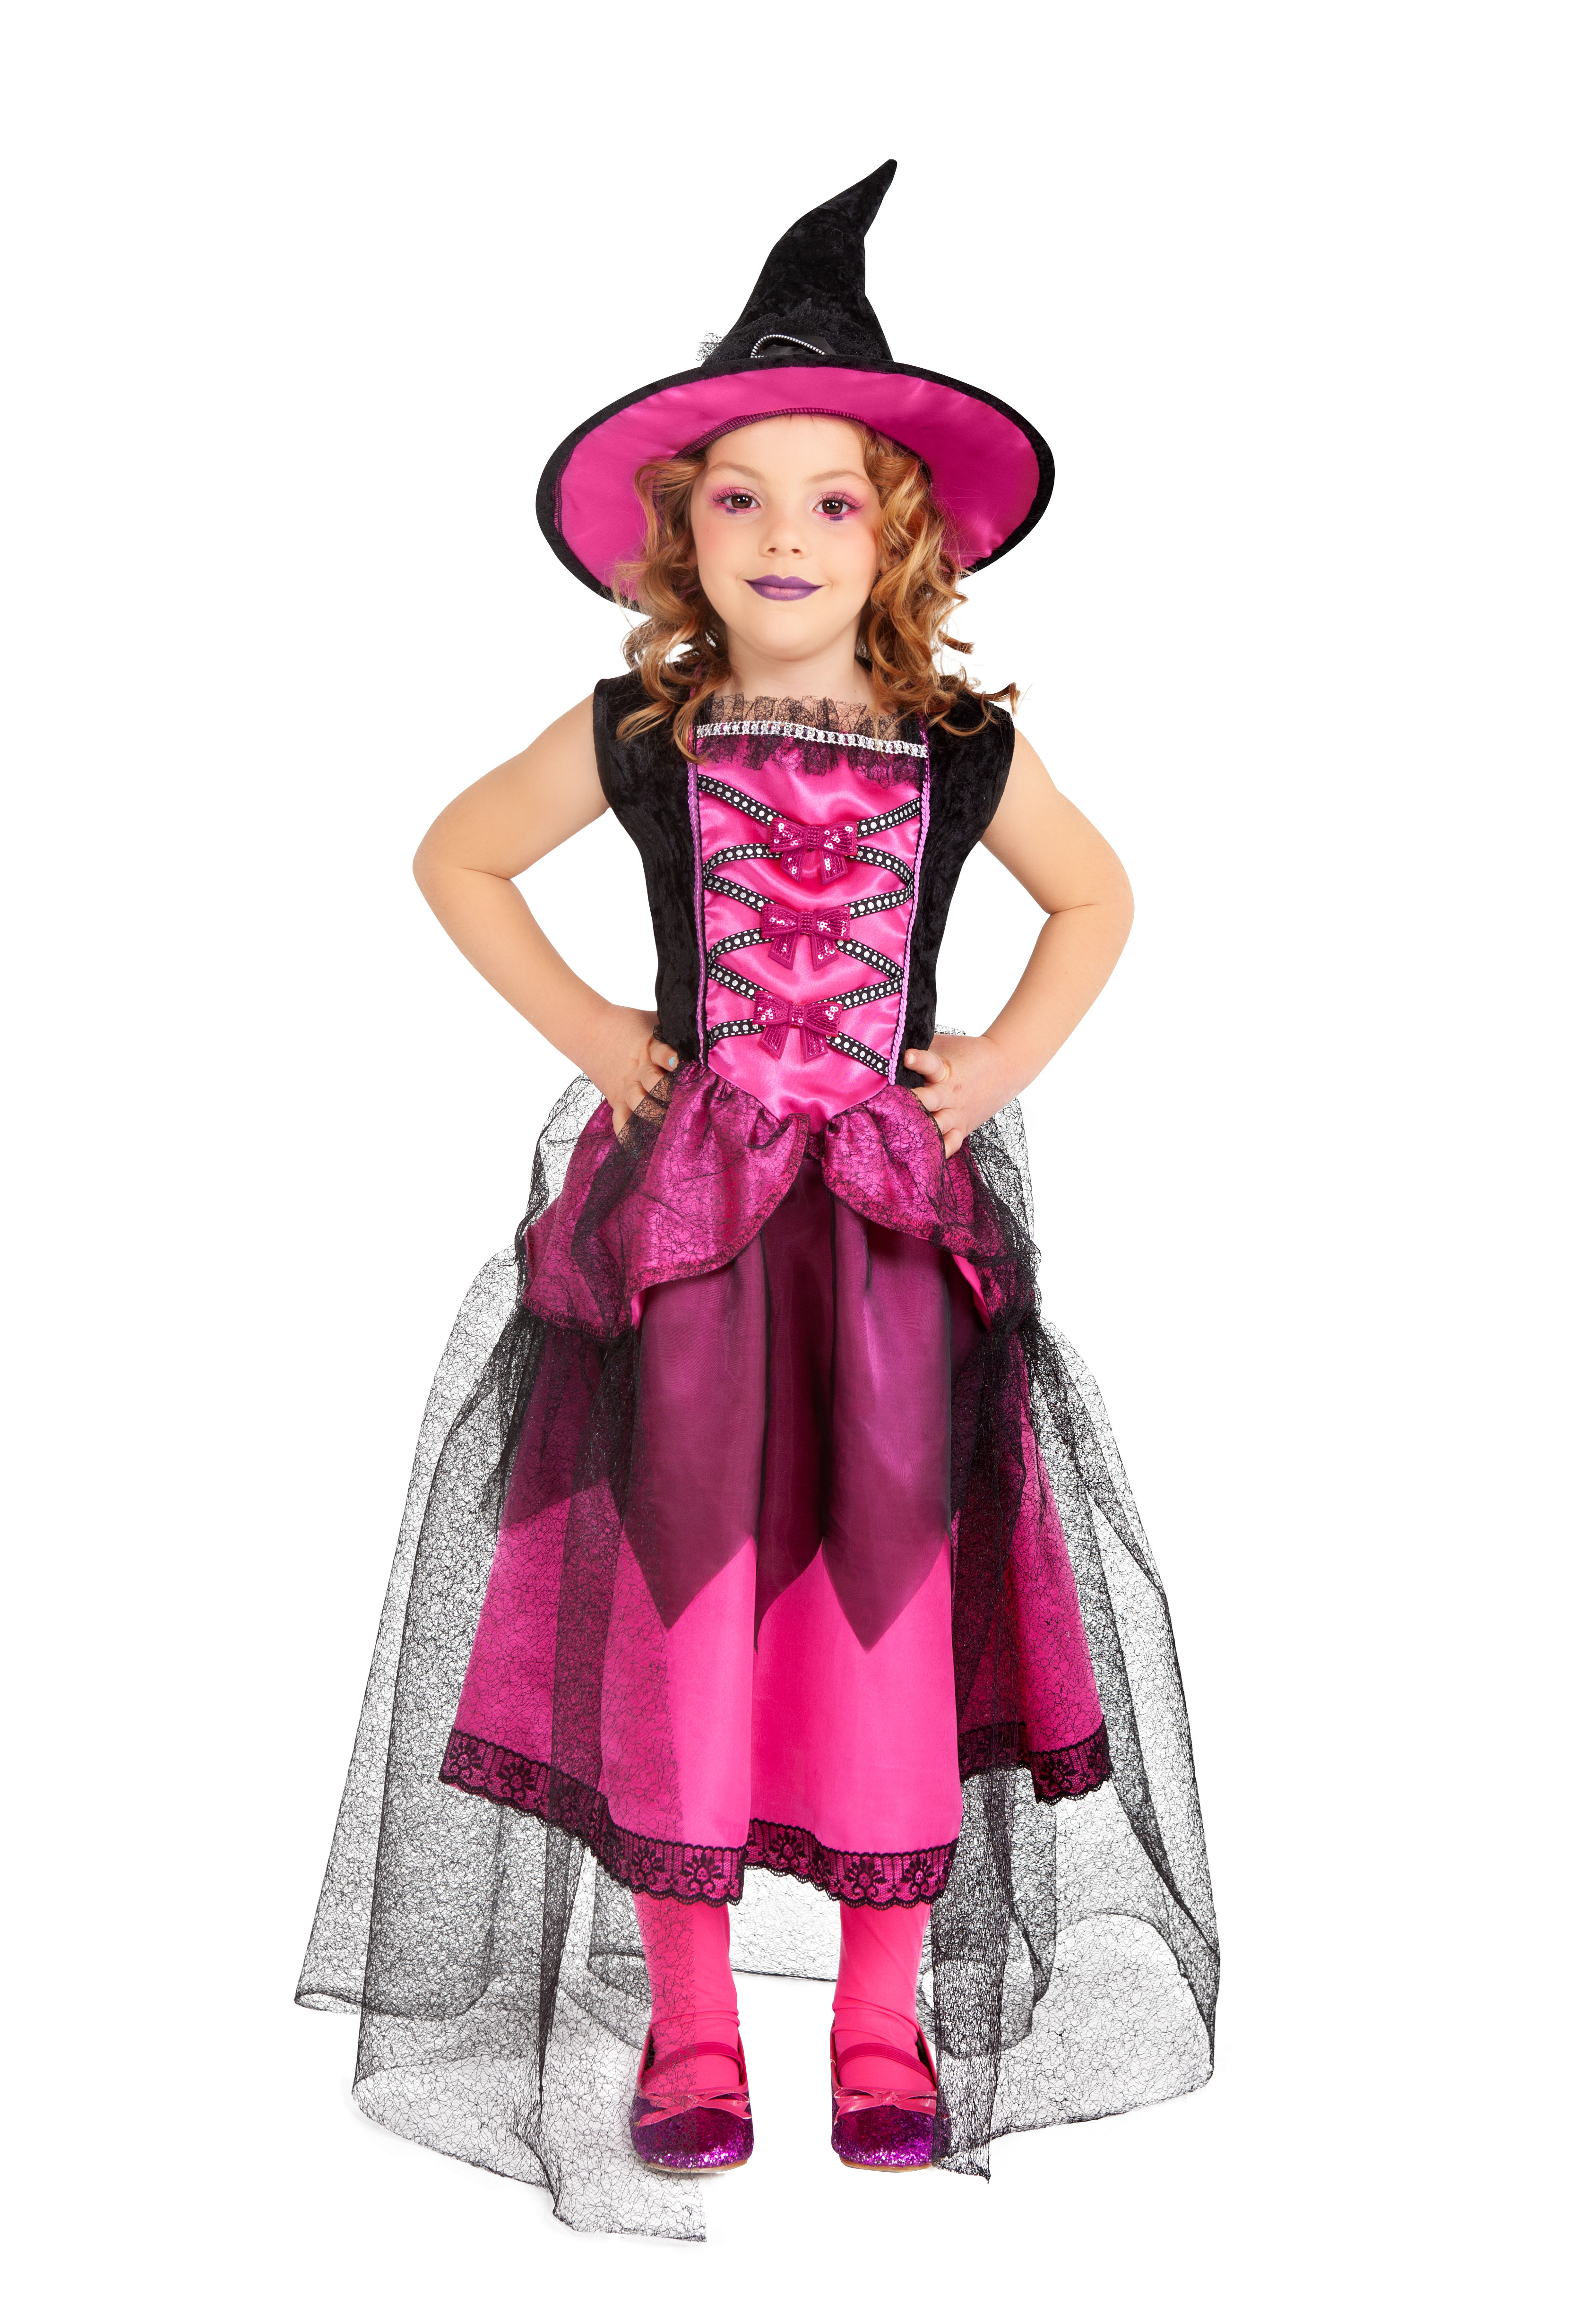 CHIC PINK WITCH COSTUME